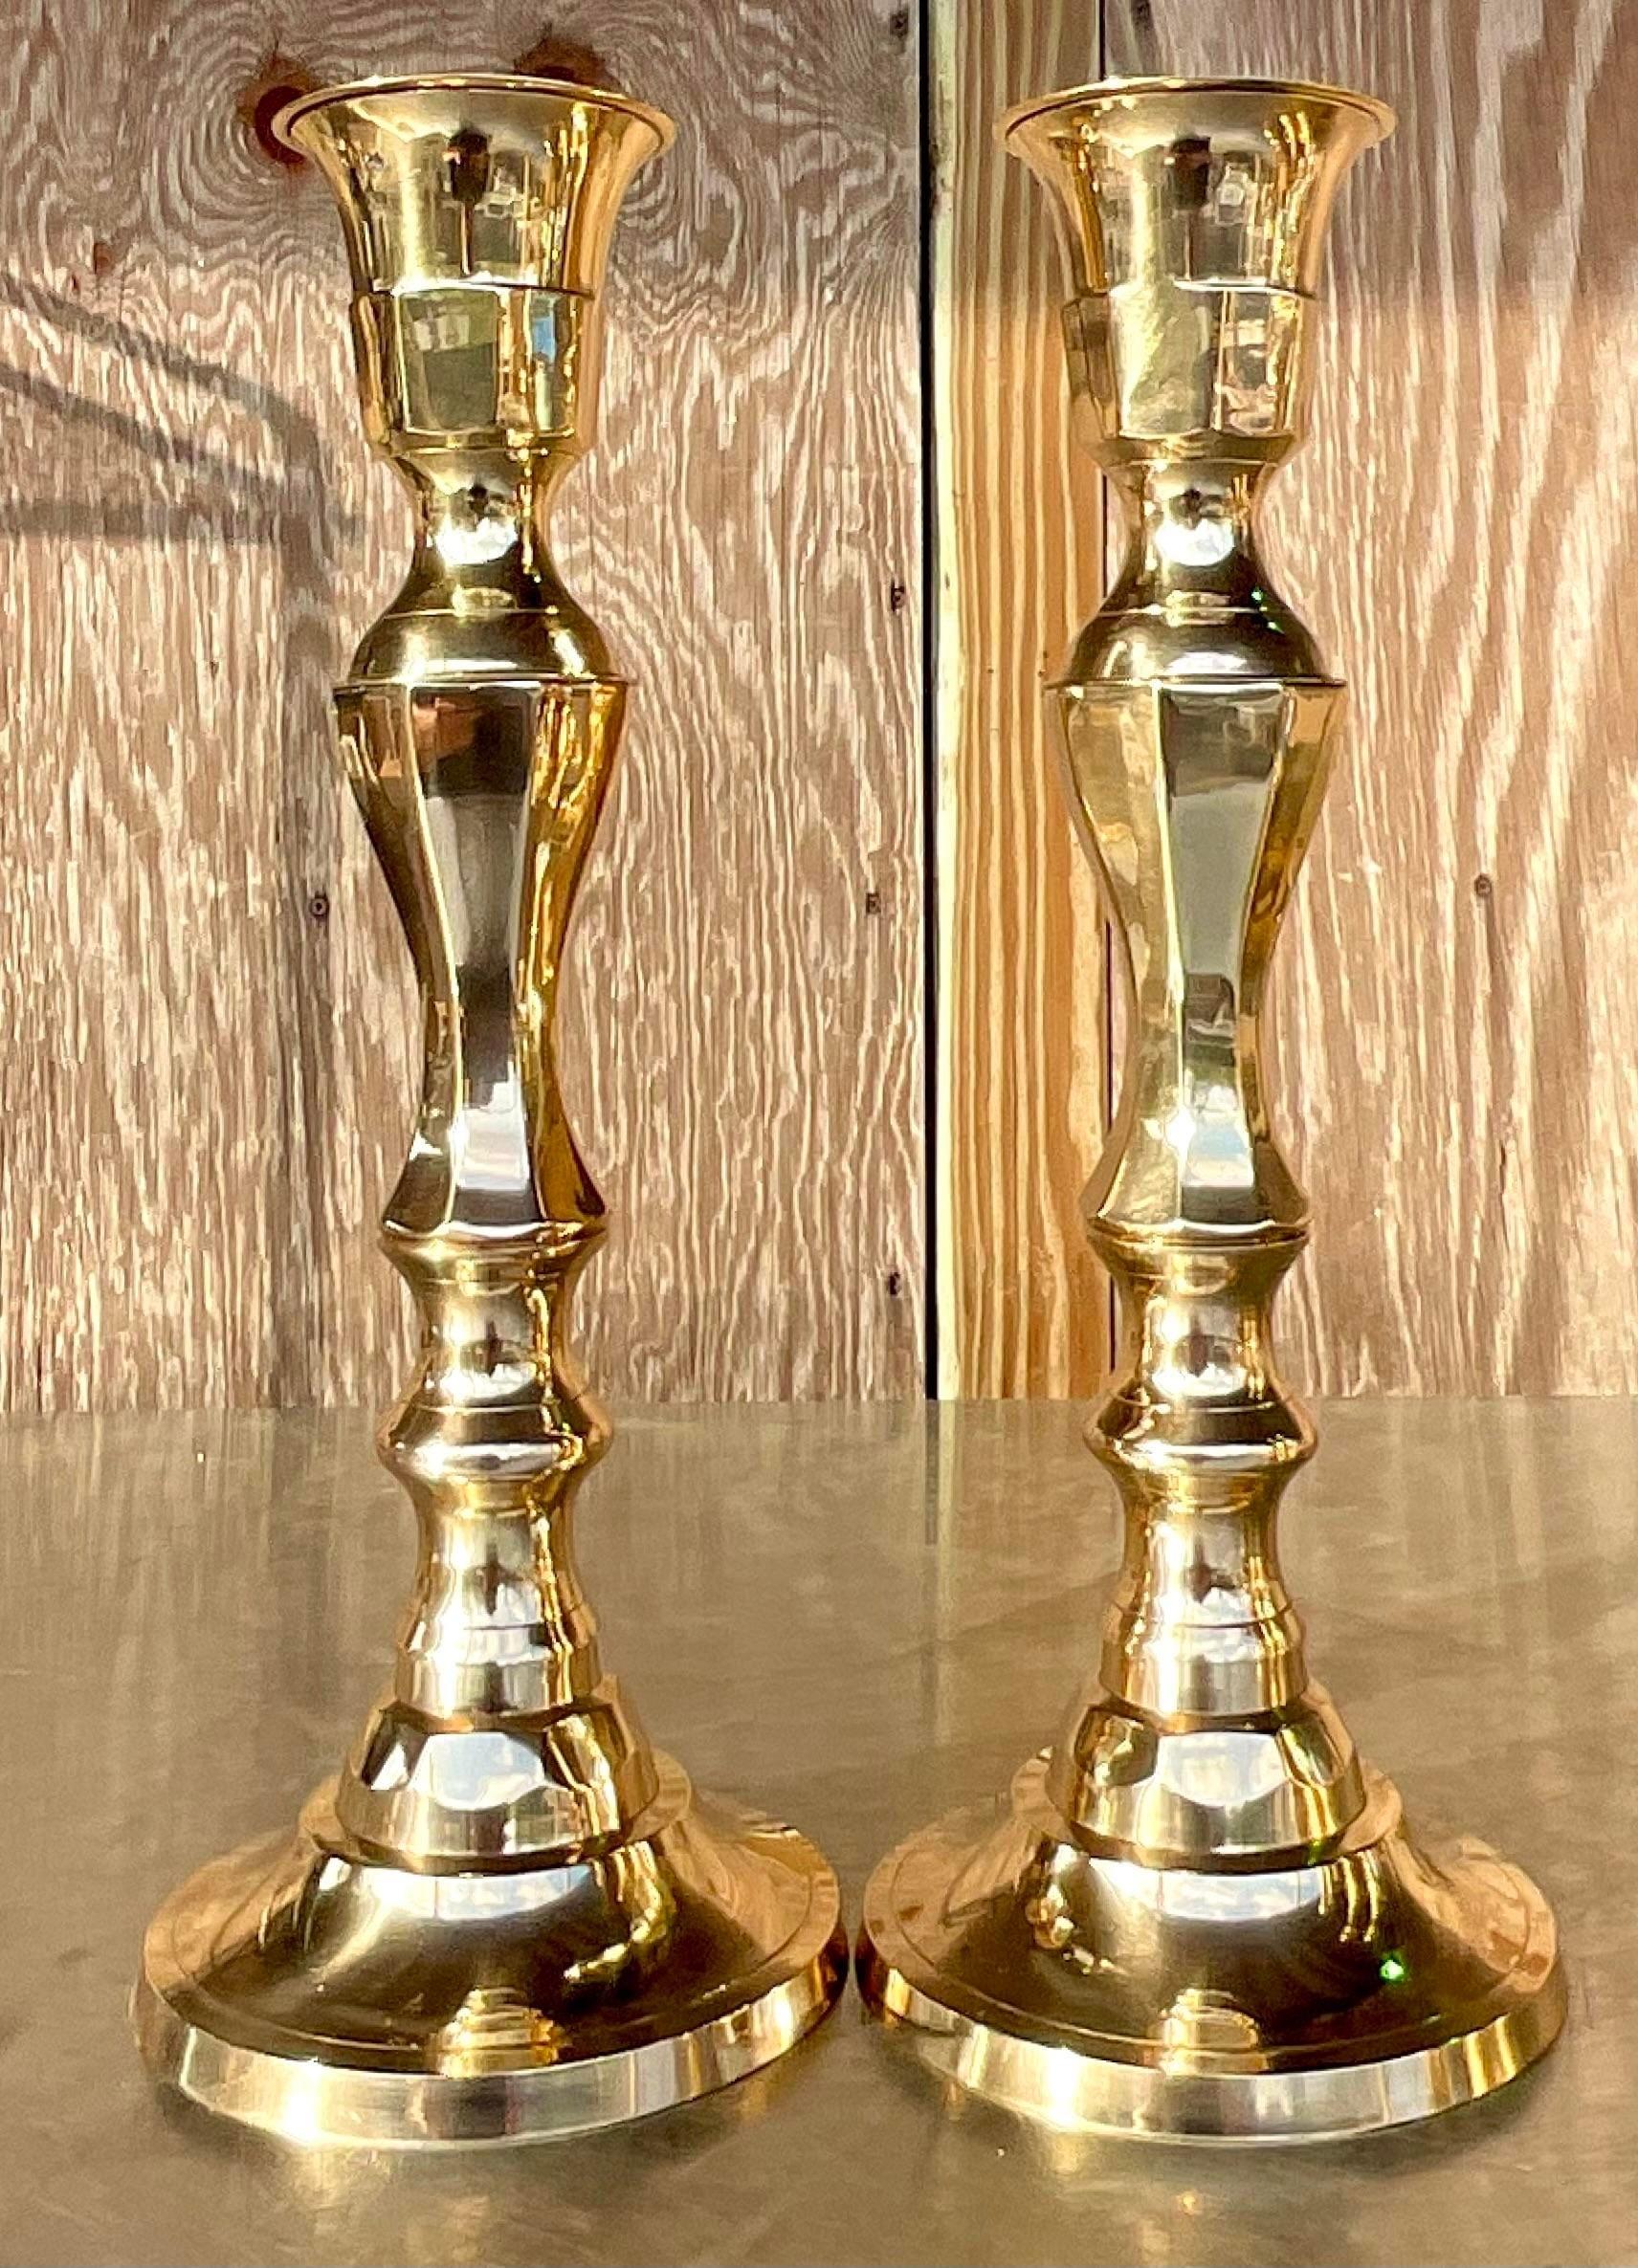 20th Century Vintage Regency Faceted Polished Brass Candlesticks - a Pair For Sale